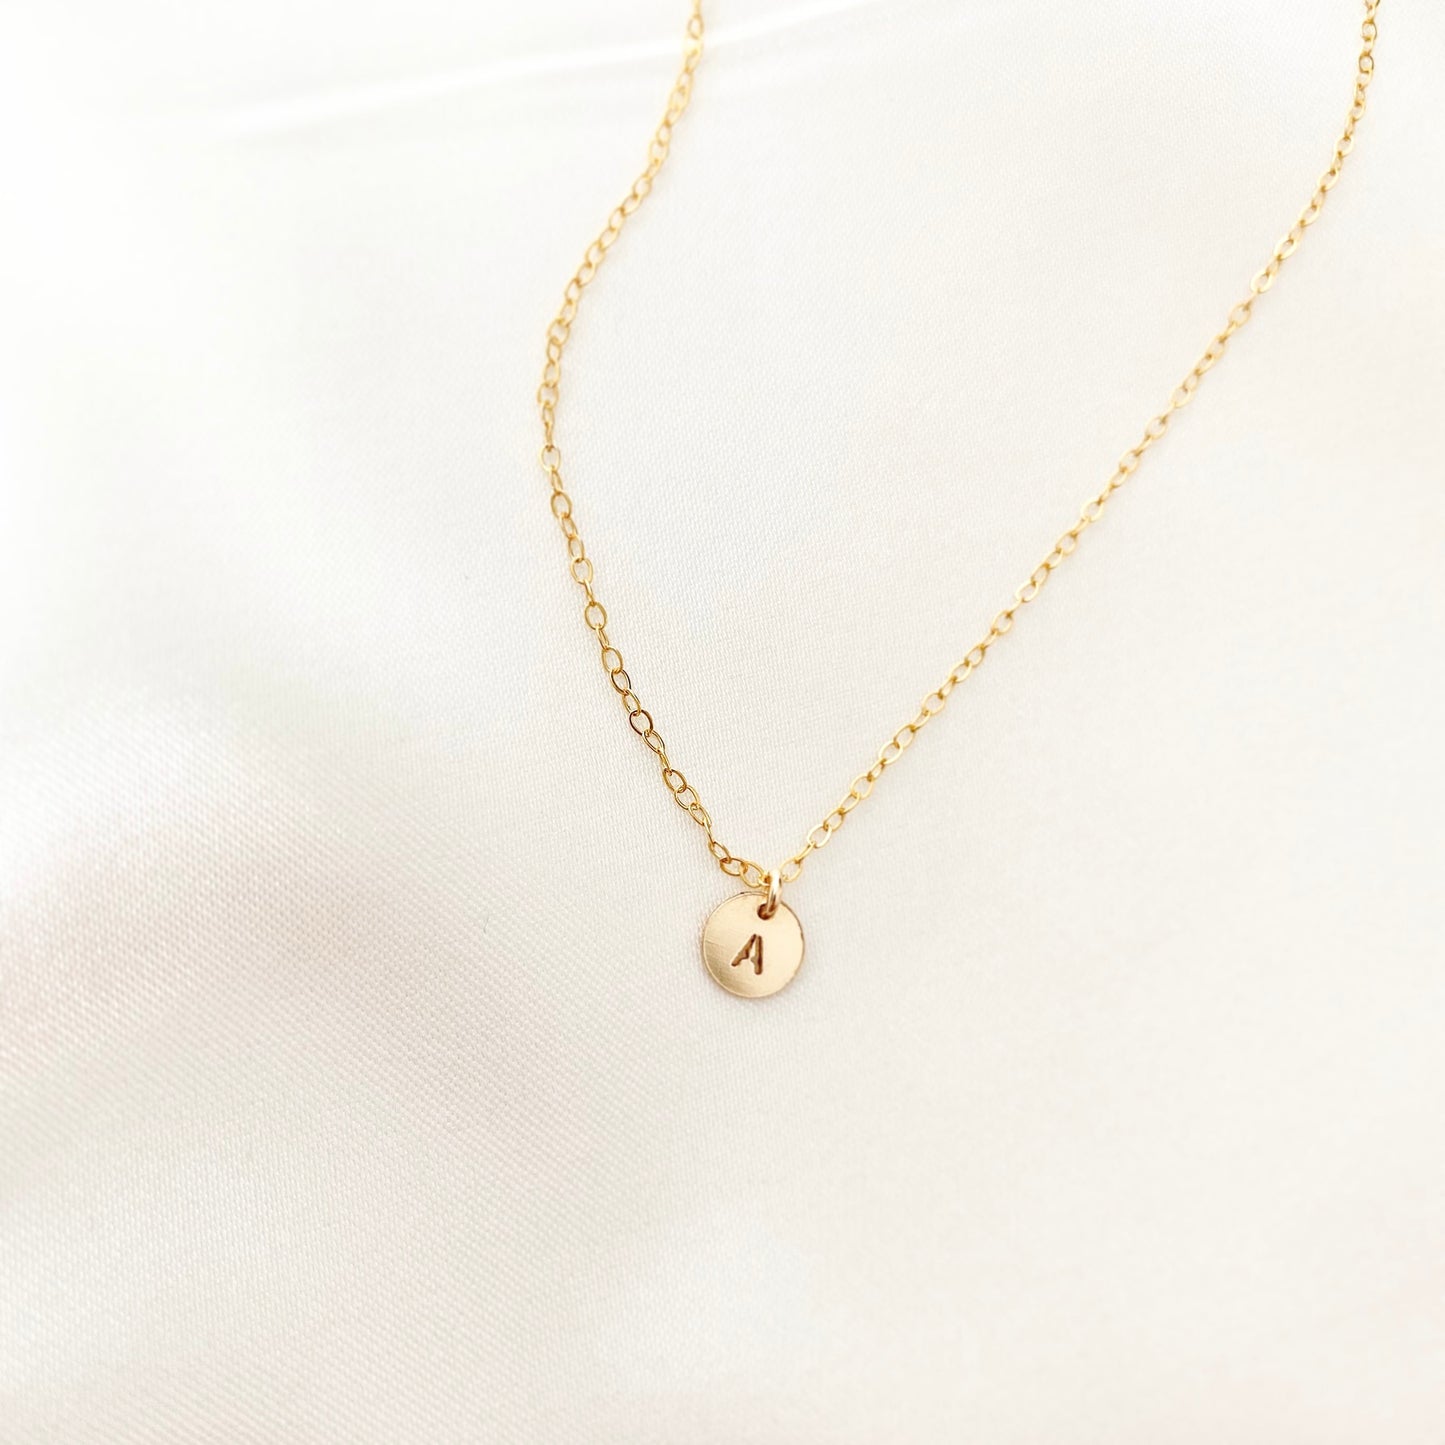 INITIAL PENDANT NECKLACE - Yellow Gold (Discontinued)